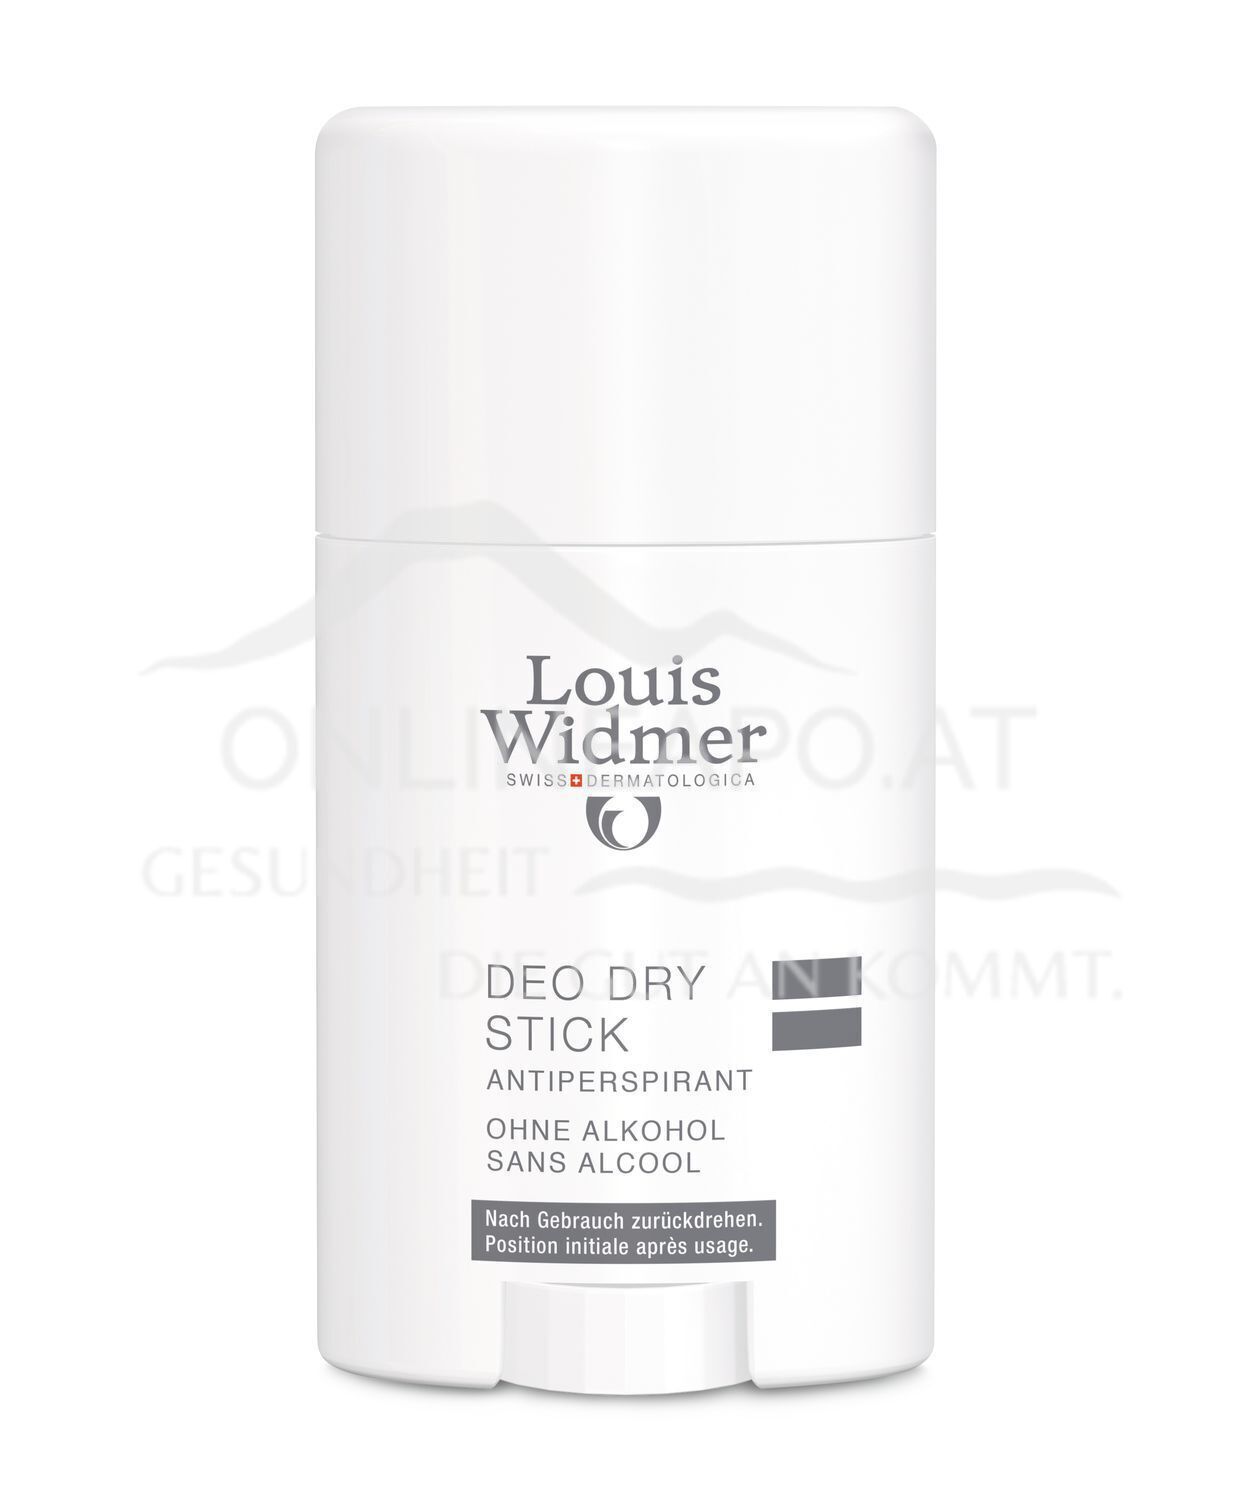 Louis Widmer Deo Dry Stick